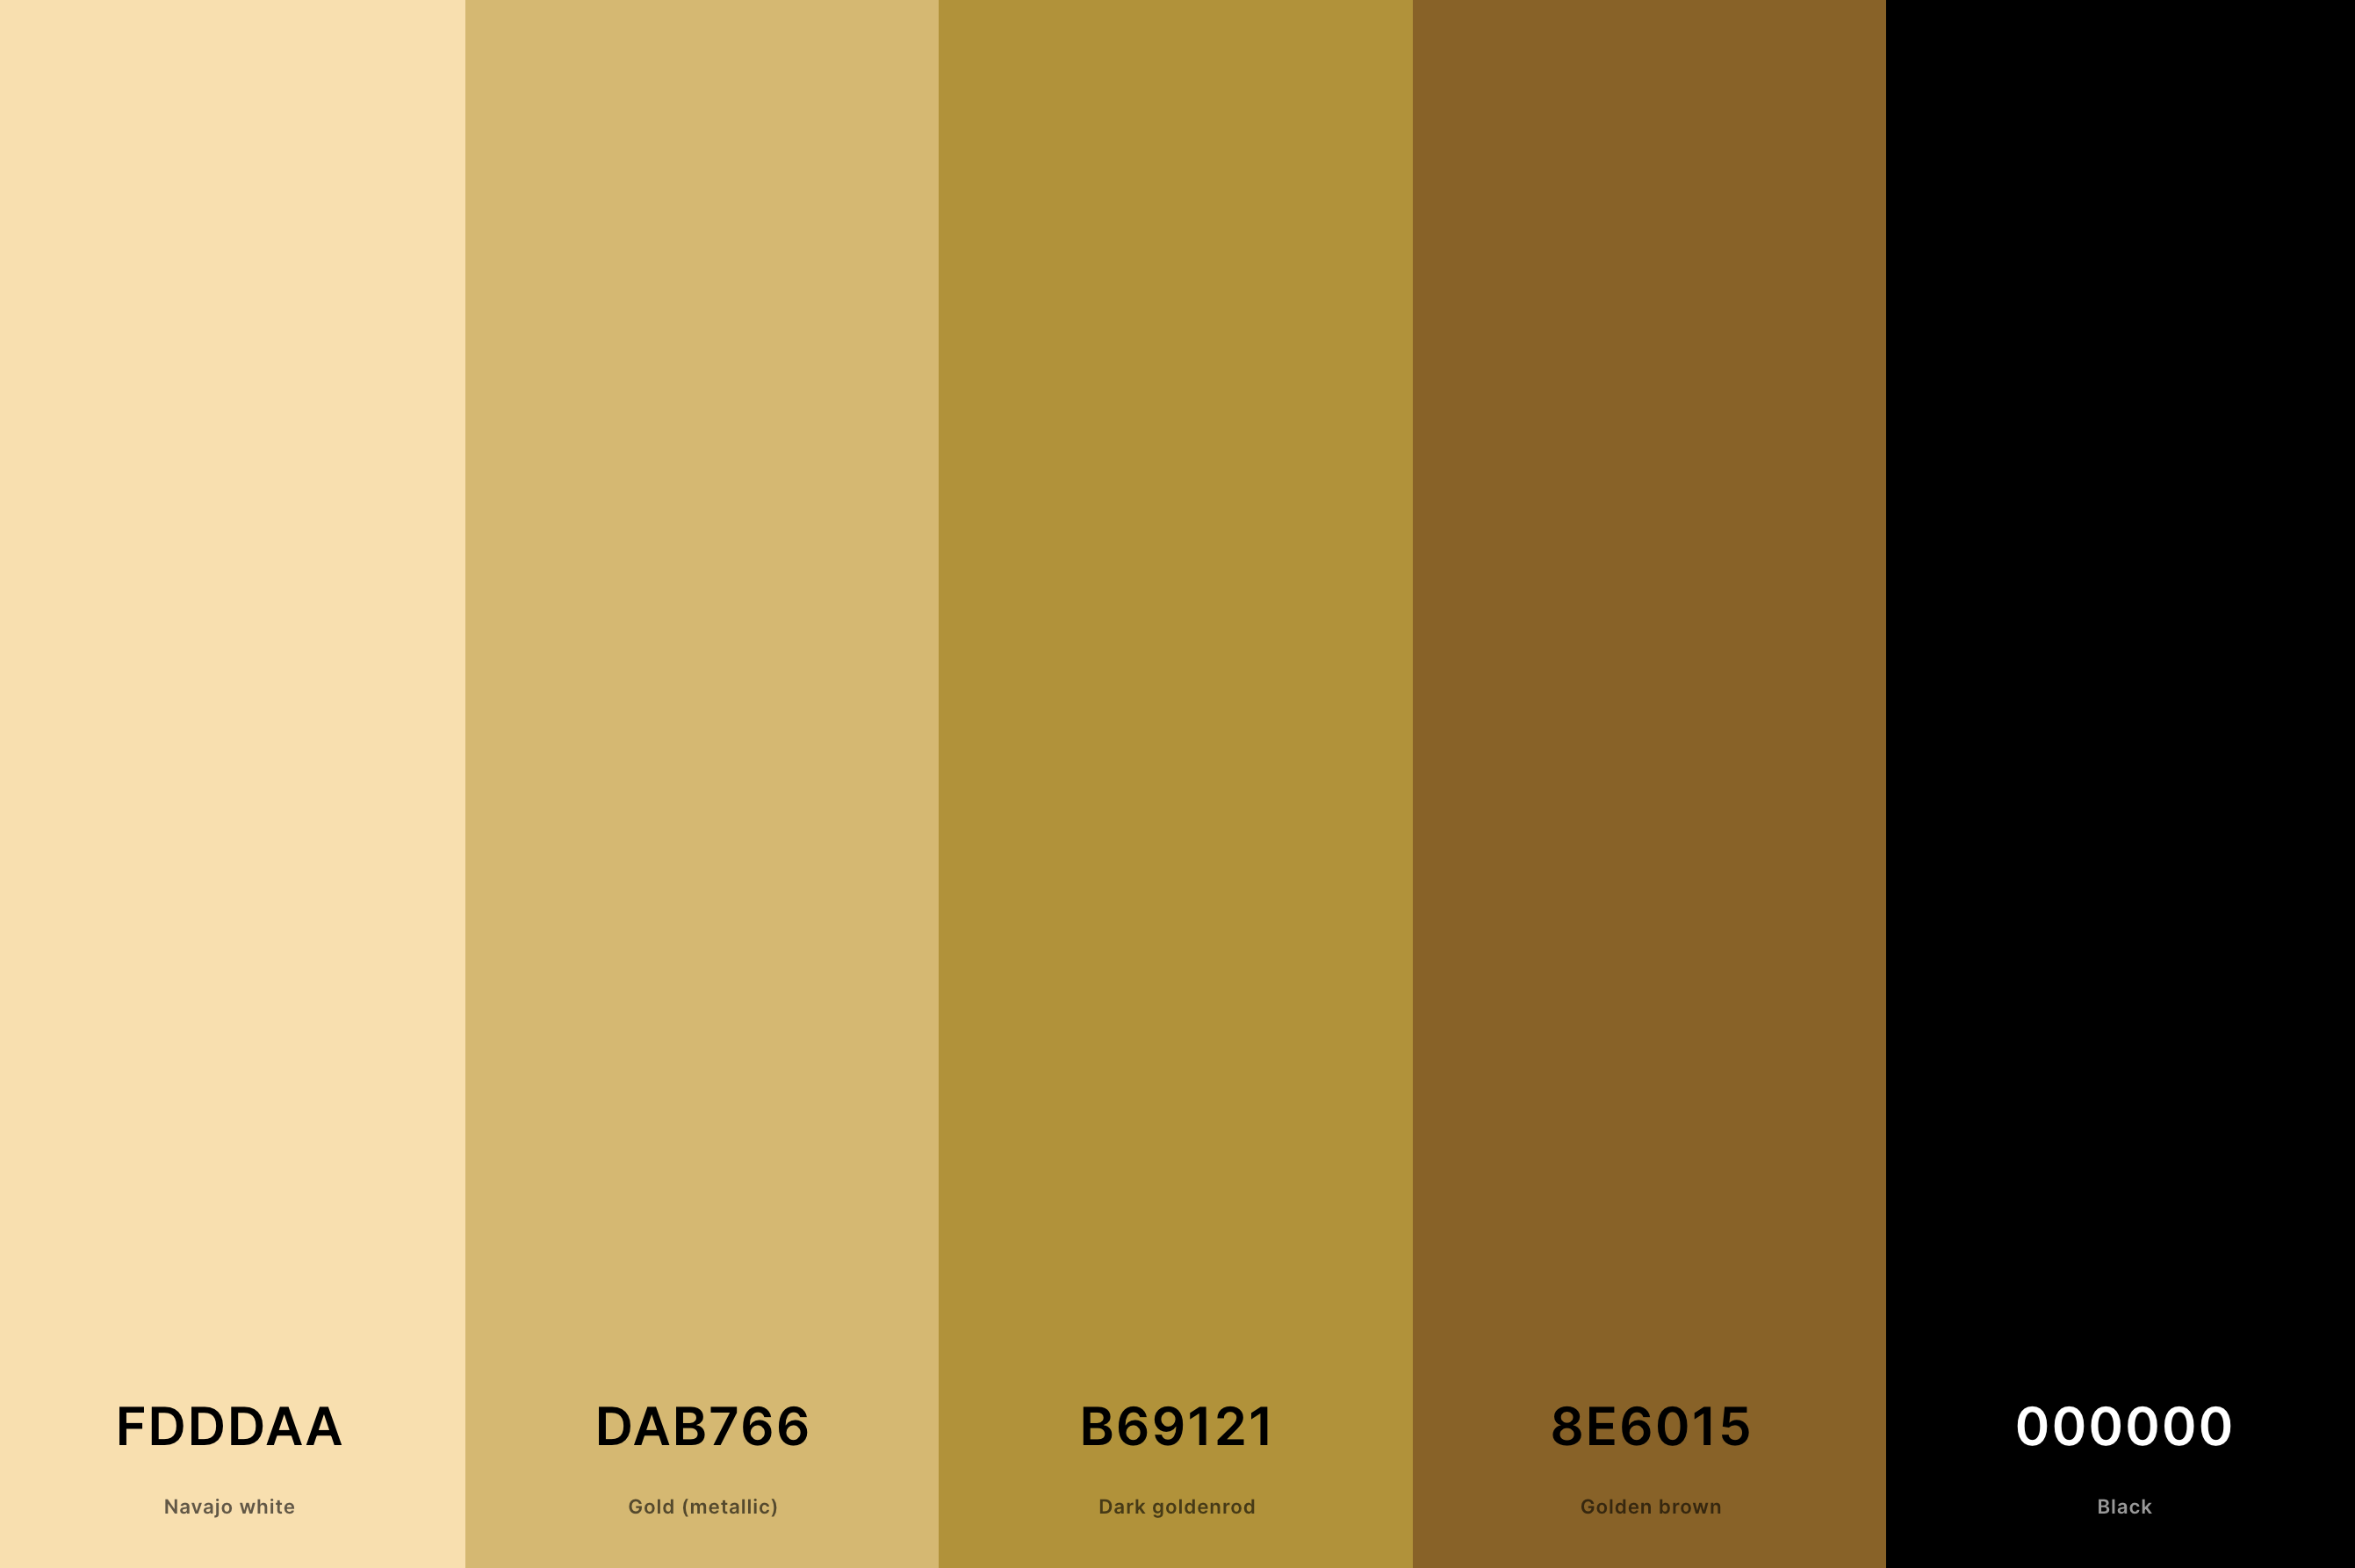 4. Black And Gold Color Palette Color Palette with Navajo White (Hex #FDDDAA) + Gold (Metallic) (Hex #DAB766) + Dark Goldenrod (Hex #B69121) + Golden Brown (Hex #8E6015) + Black (Hex #000000) Color Palette with Hex Codes